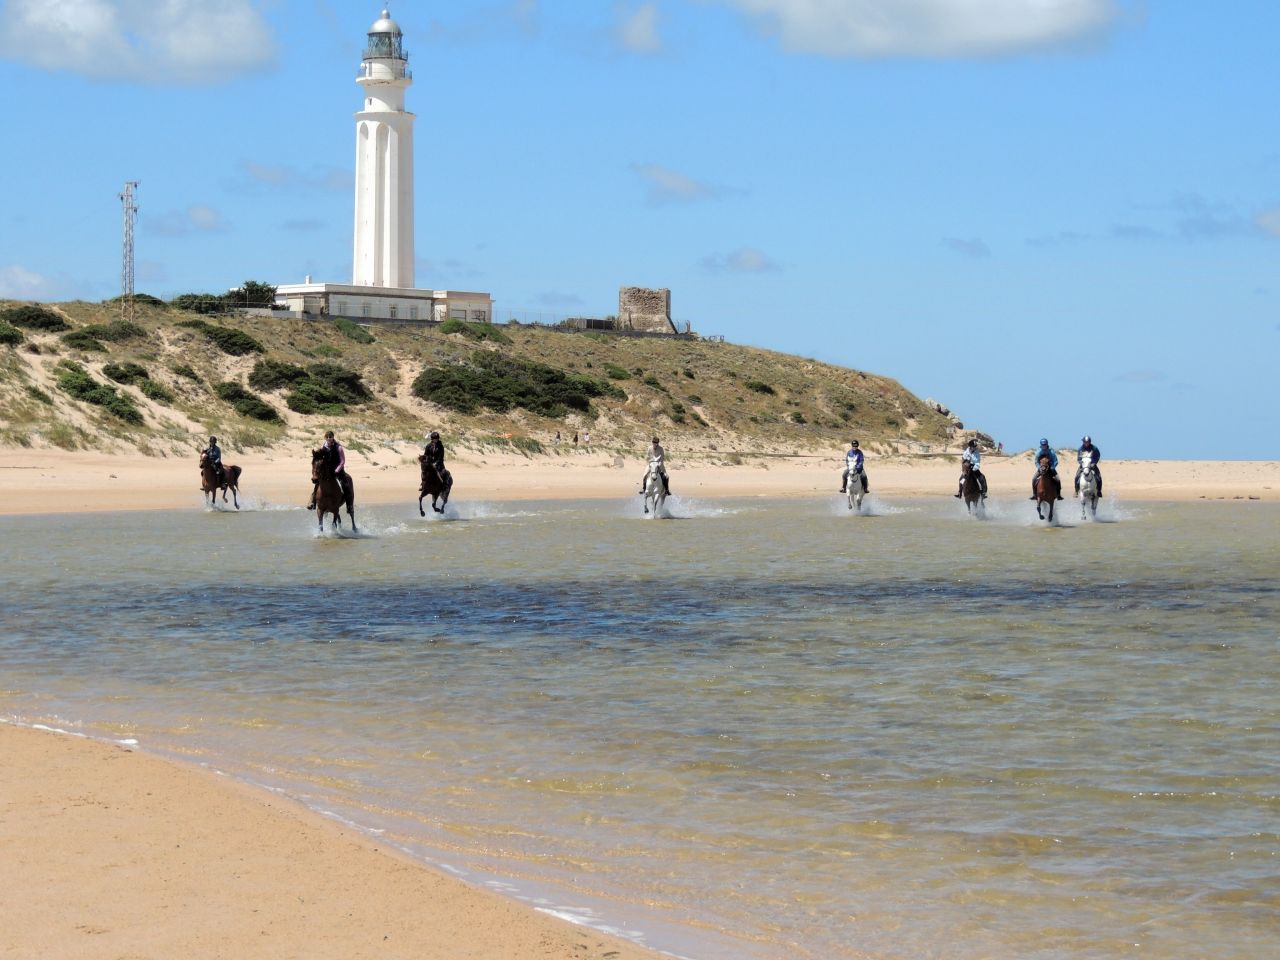 Expeditions also include rides across Cape Trafalgar -- where Britain's Royal Navy defeated Napoleon at the eponymous battle in 1805. <br />For more details visit <a href="http://www.fantasiaadventureholidays.com" target="_blank" target="_blank">Fantasia Adventure Holidays</a>  